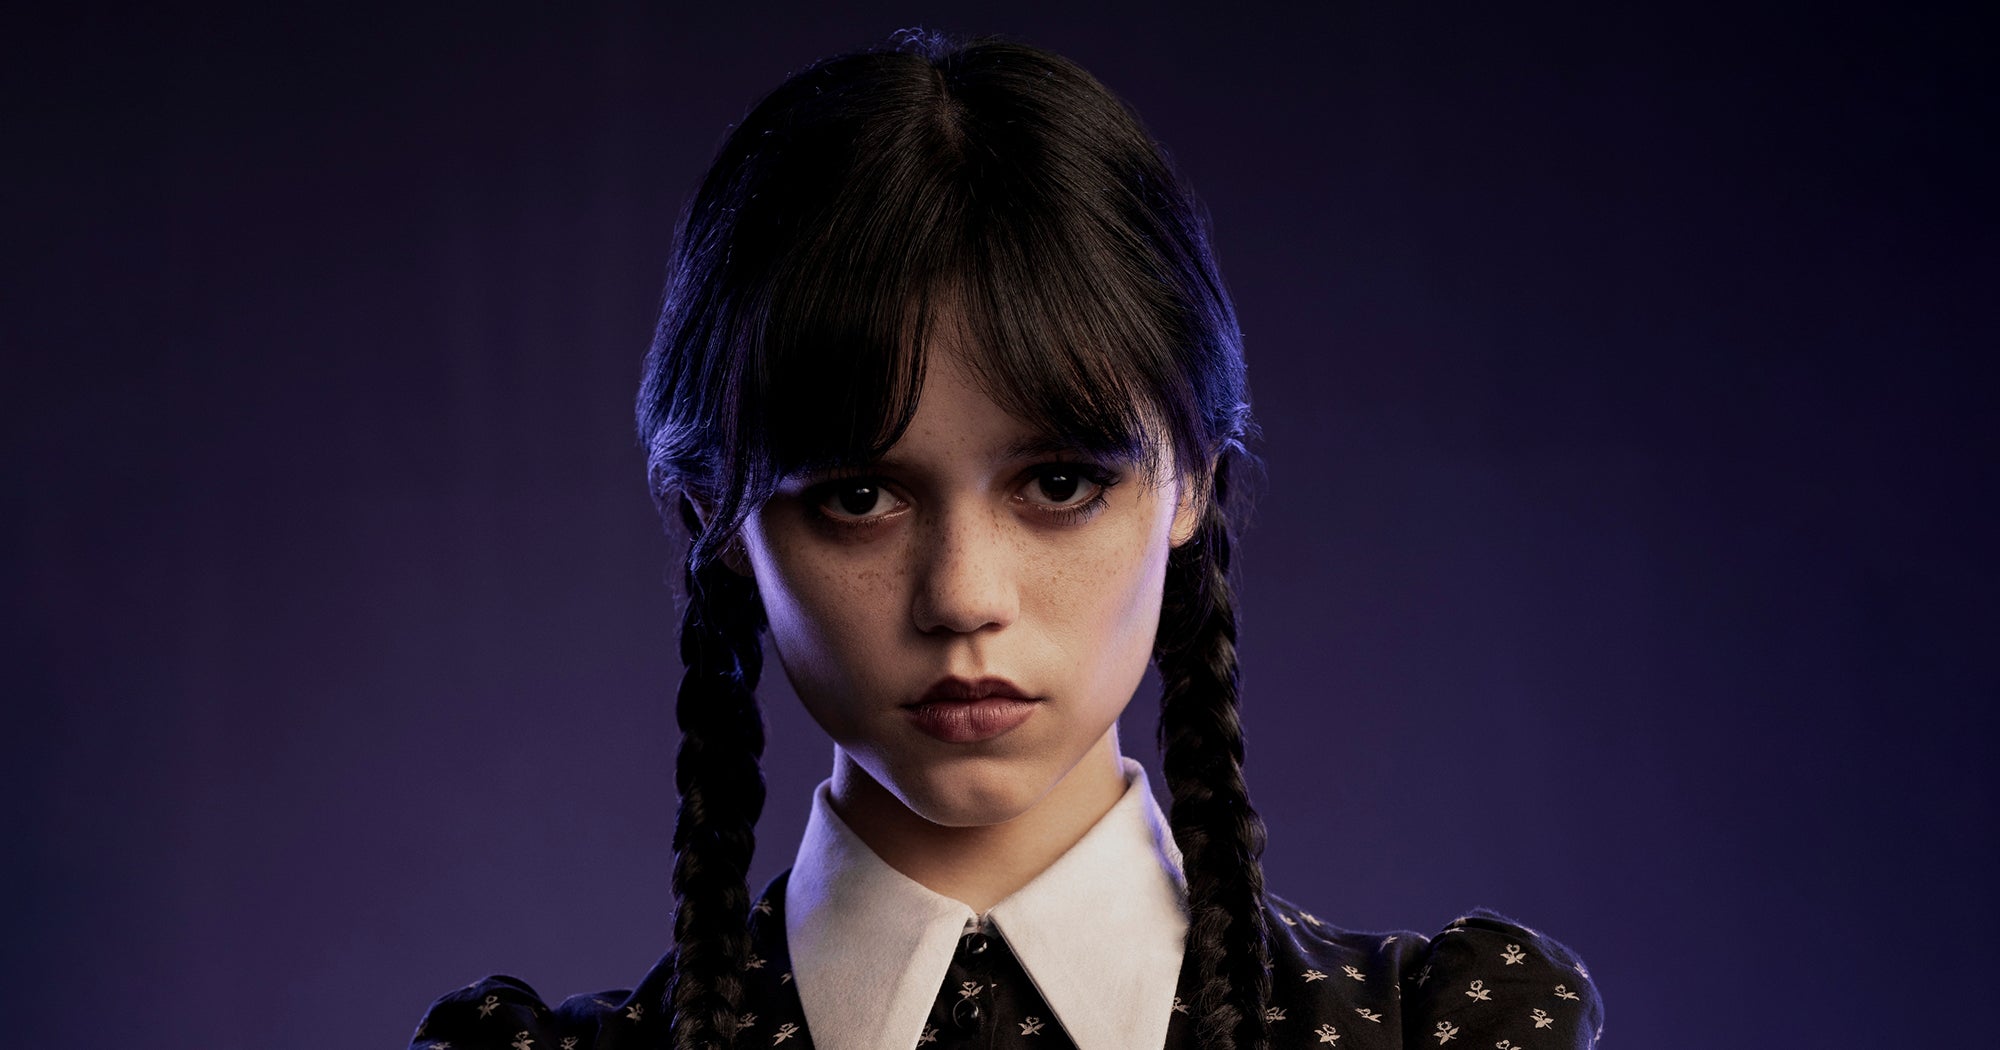 Wednesday Addams’ Outfits Are A Master Class In All-Black Styling For The Modern Day